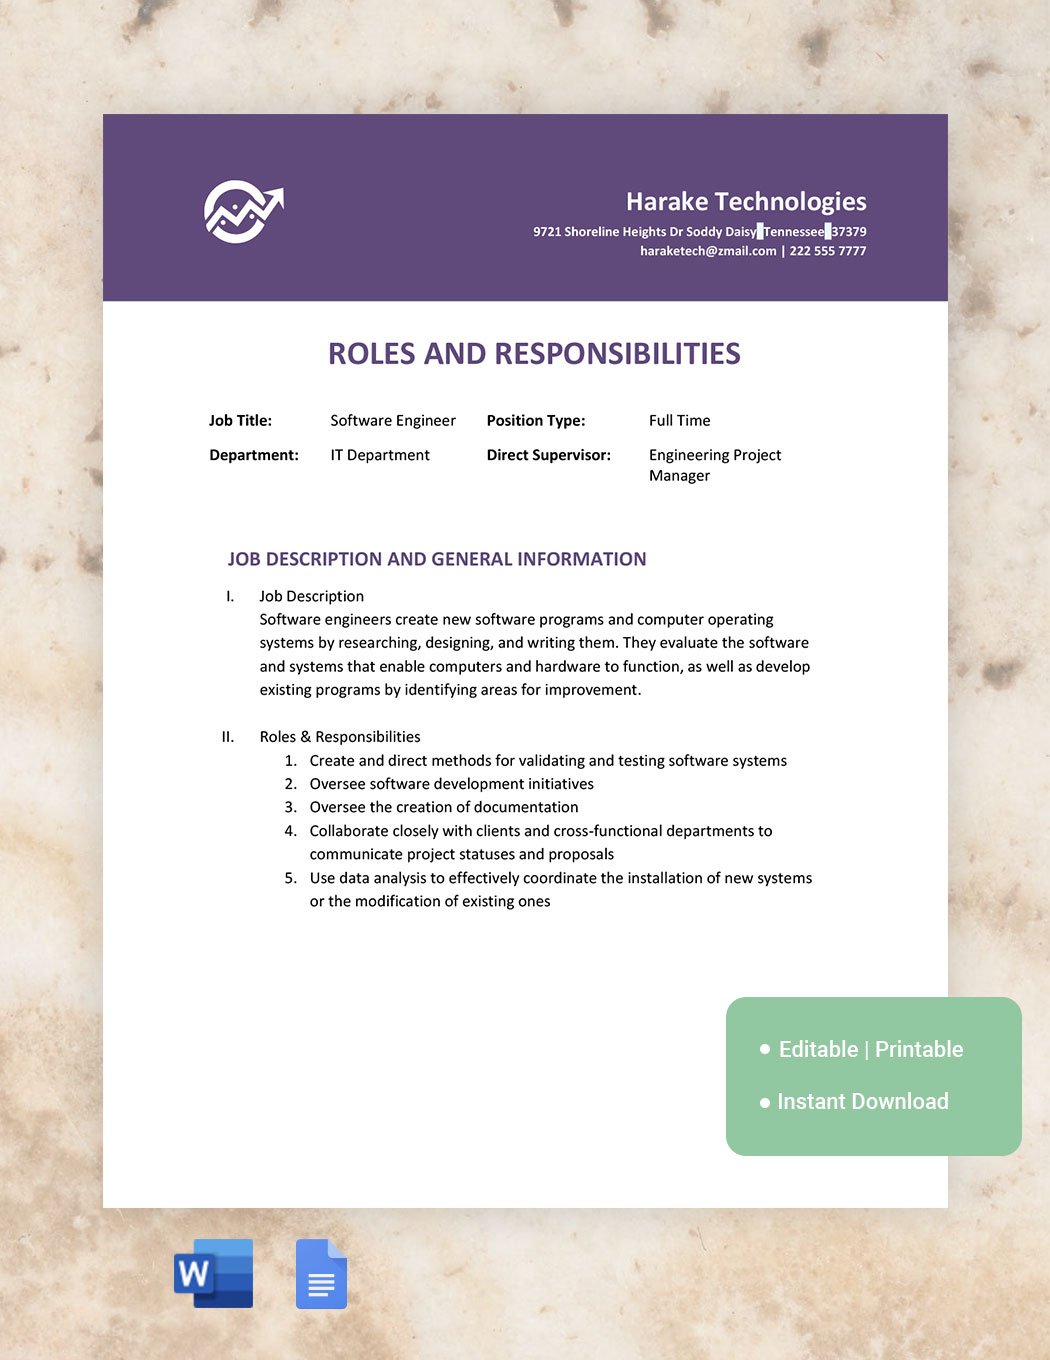 Software Engineer Roles And Responsibilities Template in Word, Google Docs